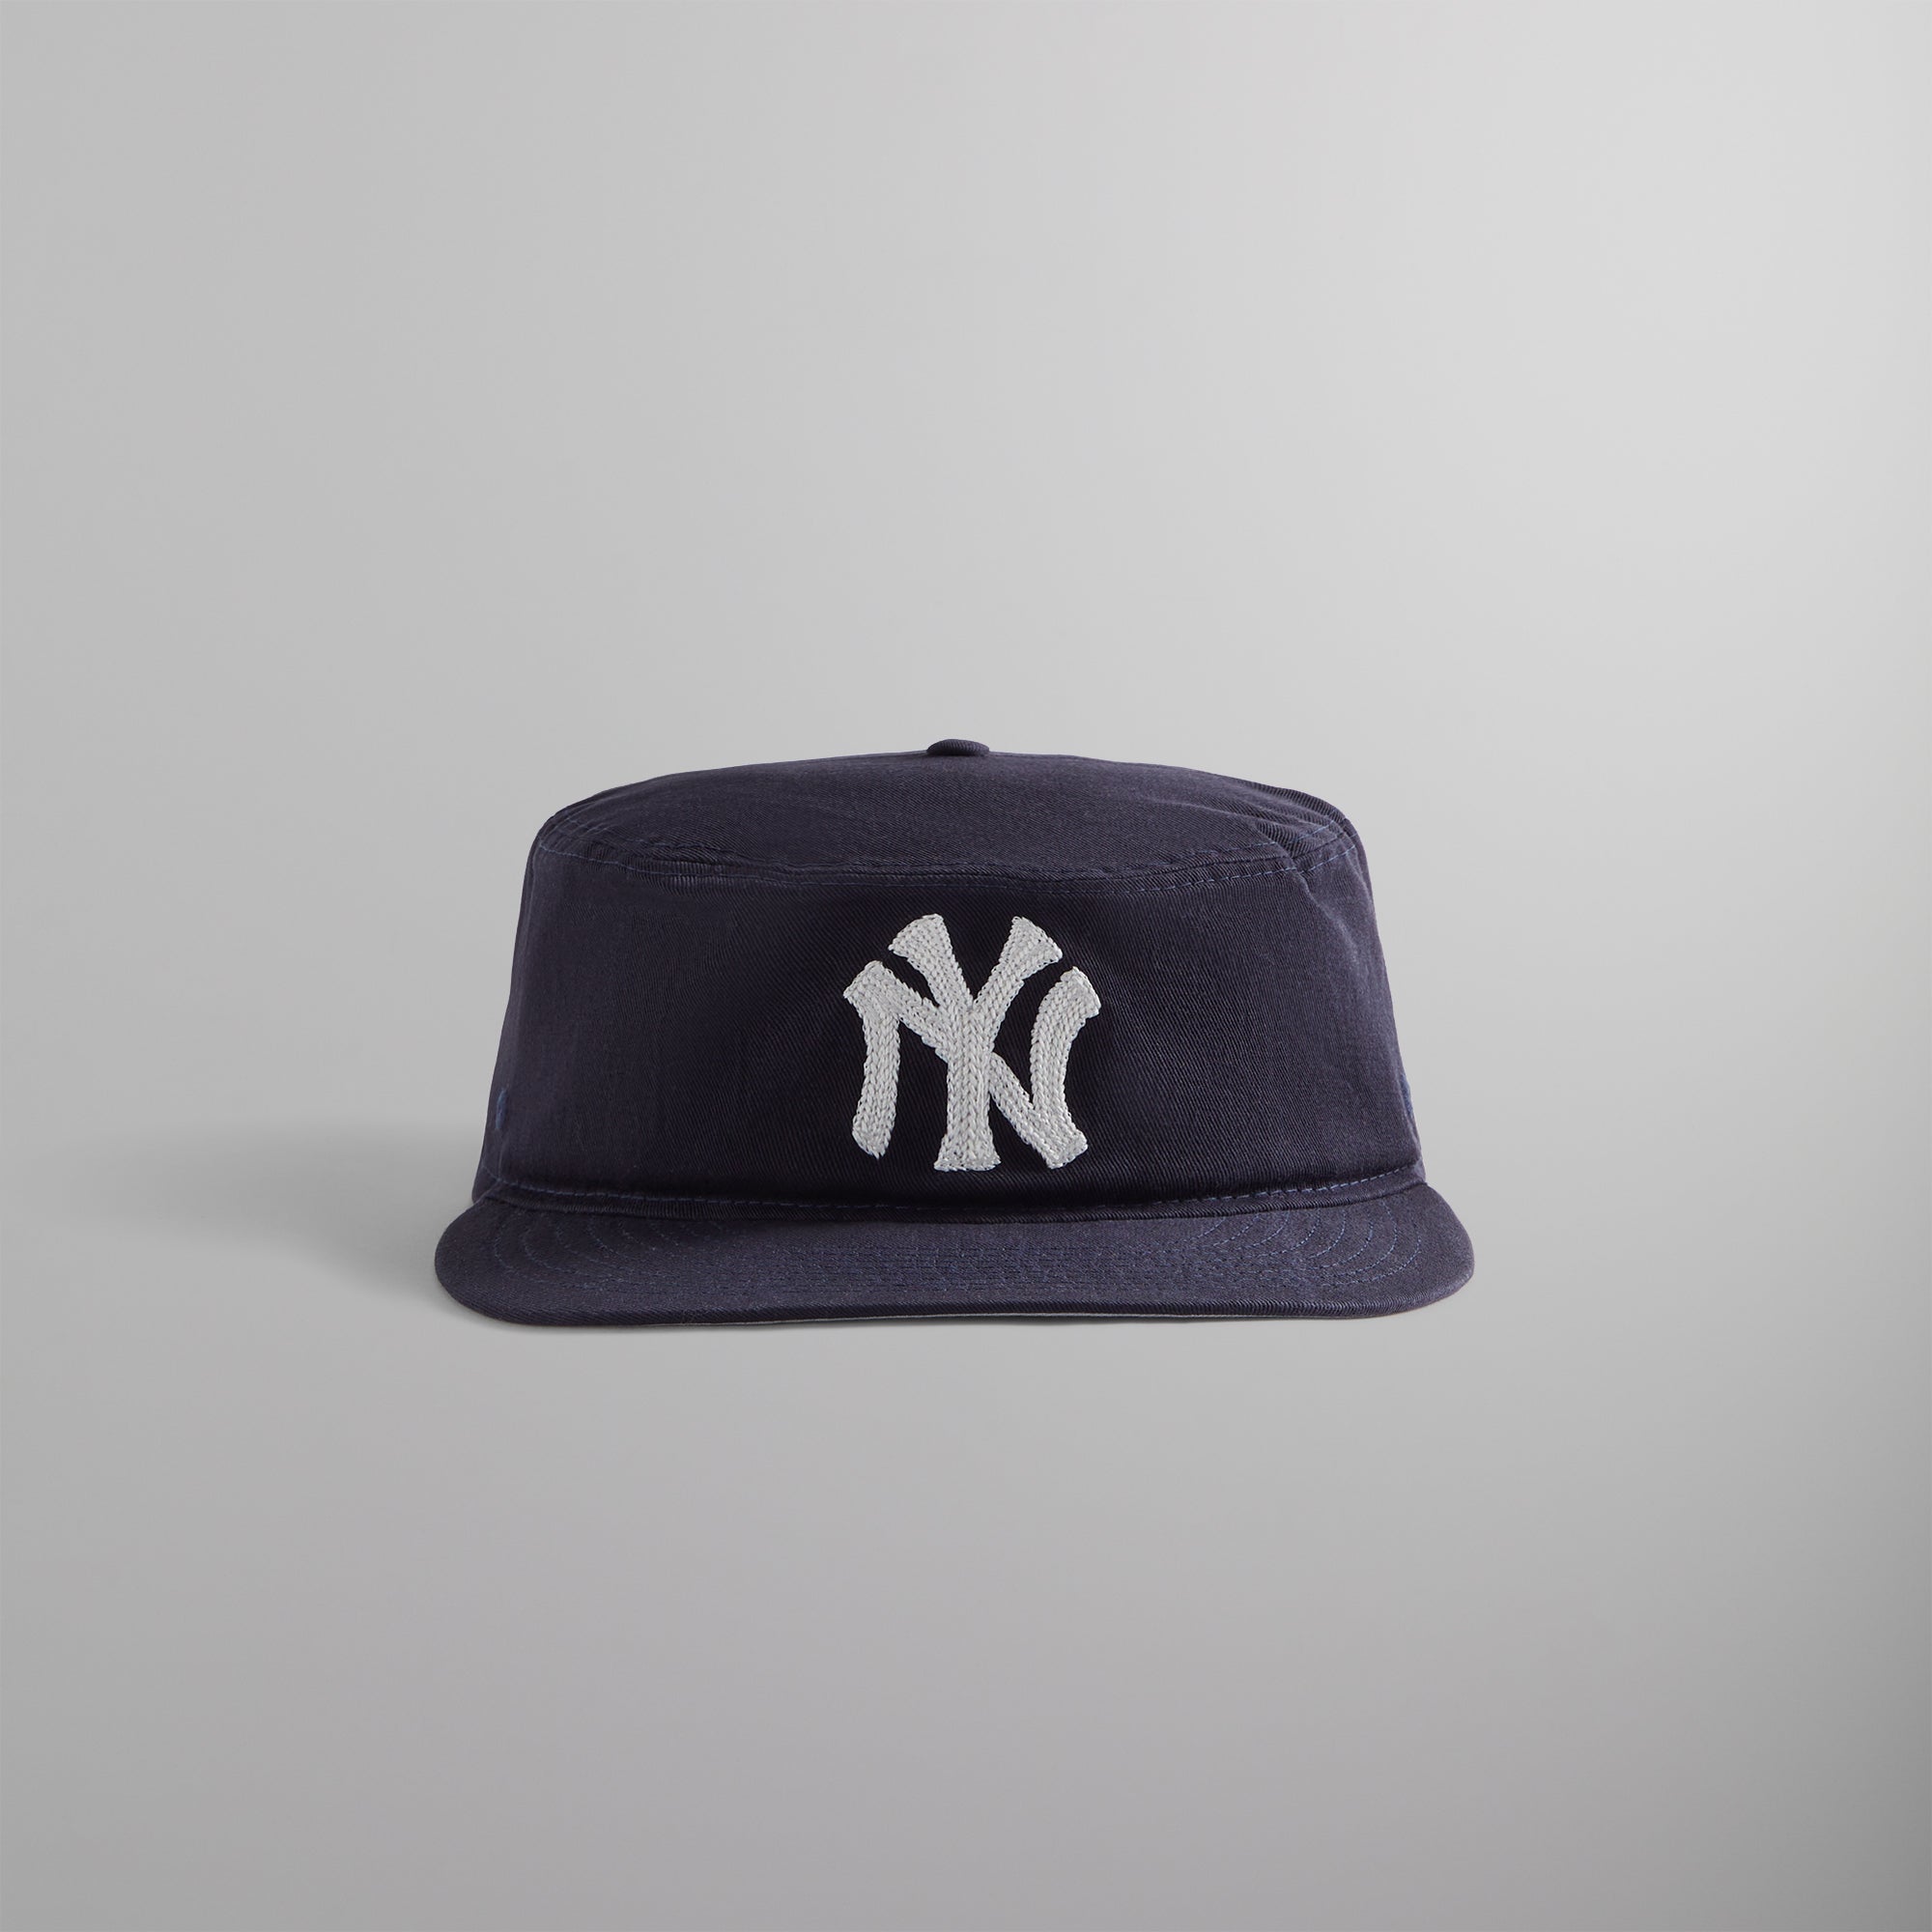 Kith & New Era for Yankees Pillbox - Nocturnal